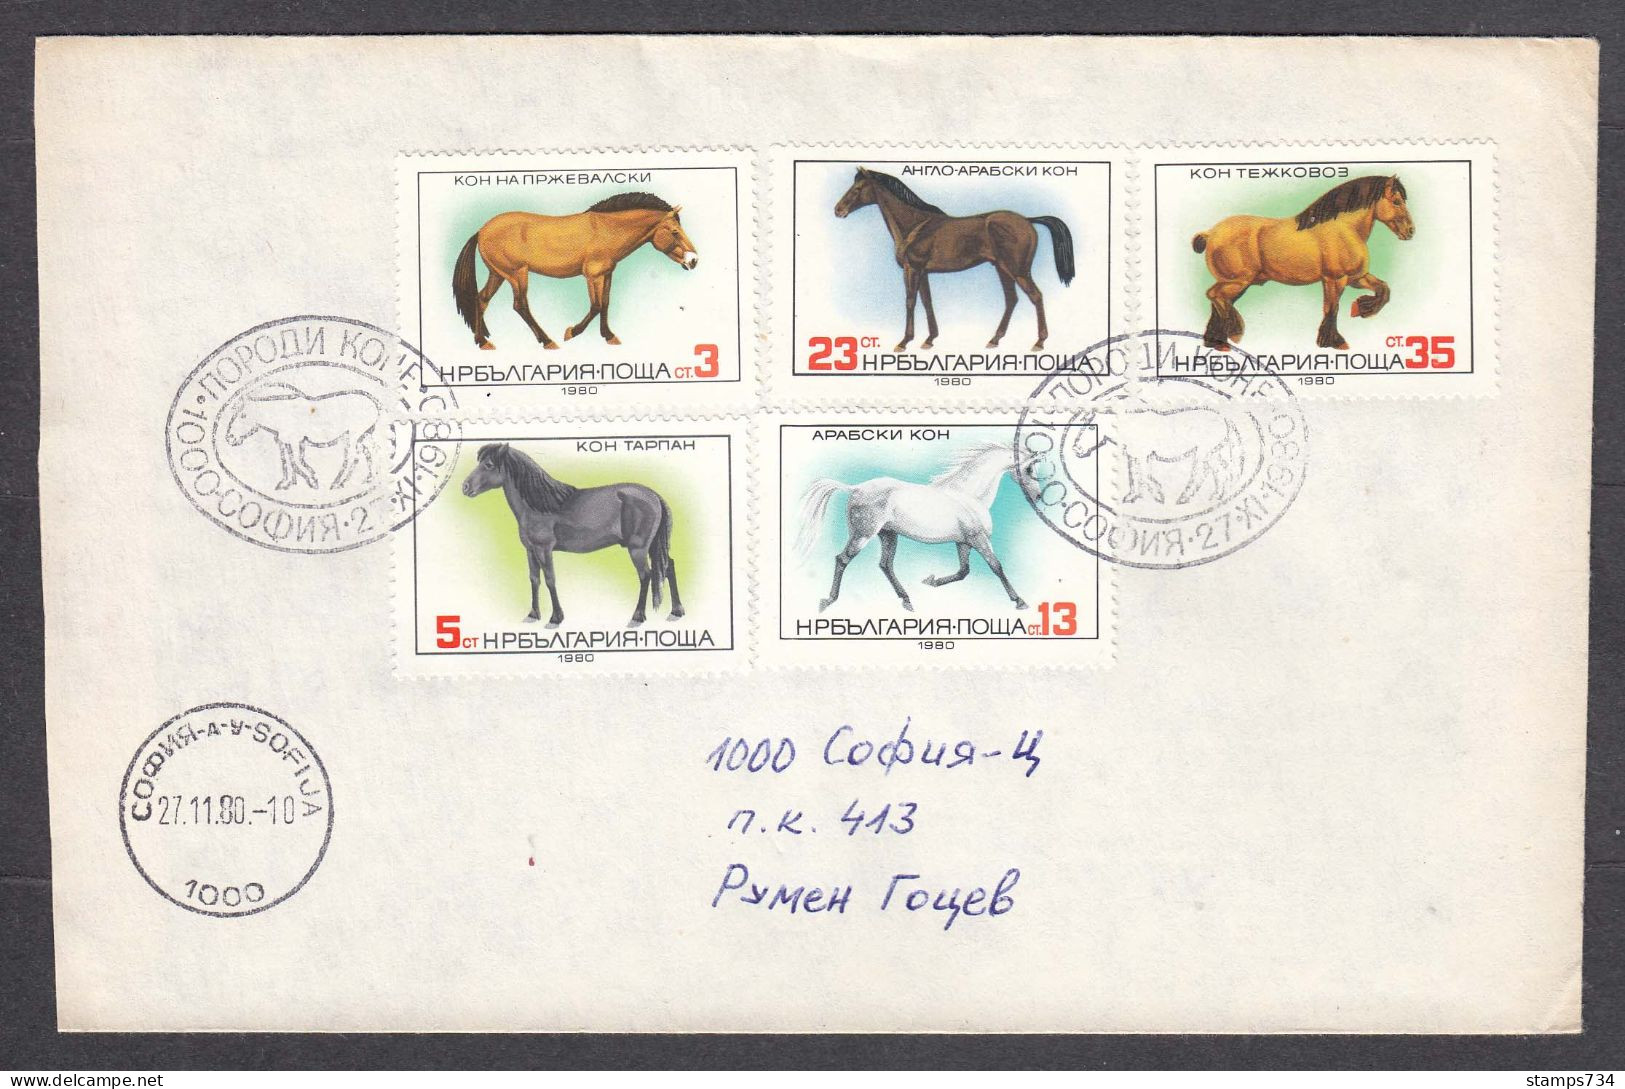 Bulgaria 1980 - Horses, Mi-Nr. 2952/56, Letter With Special Cancelation And FDC - FDC